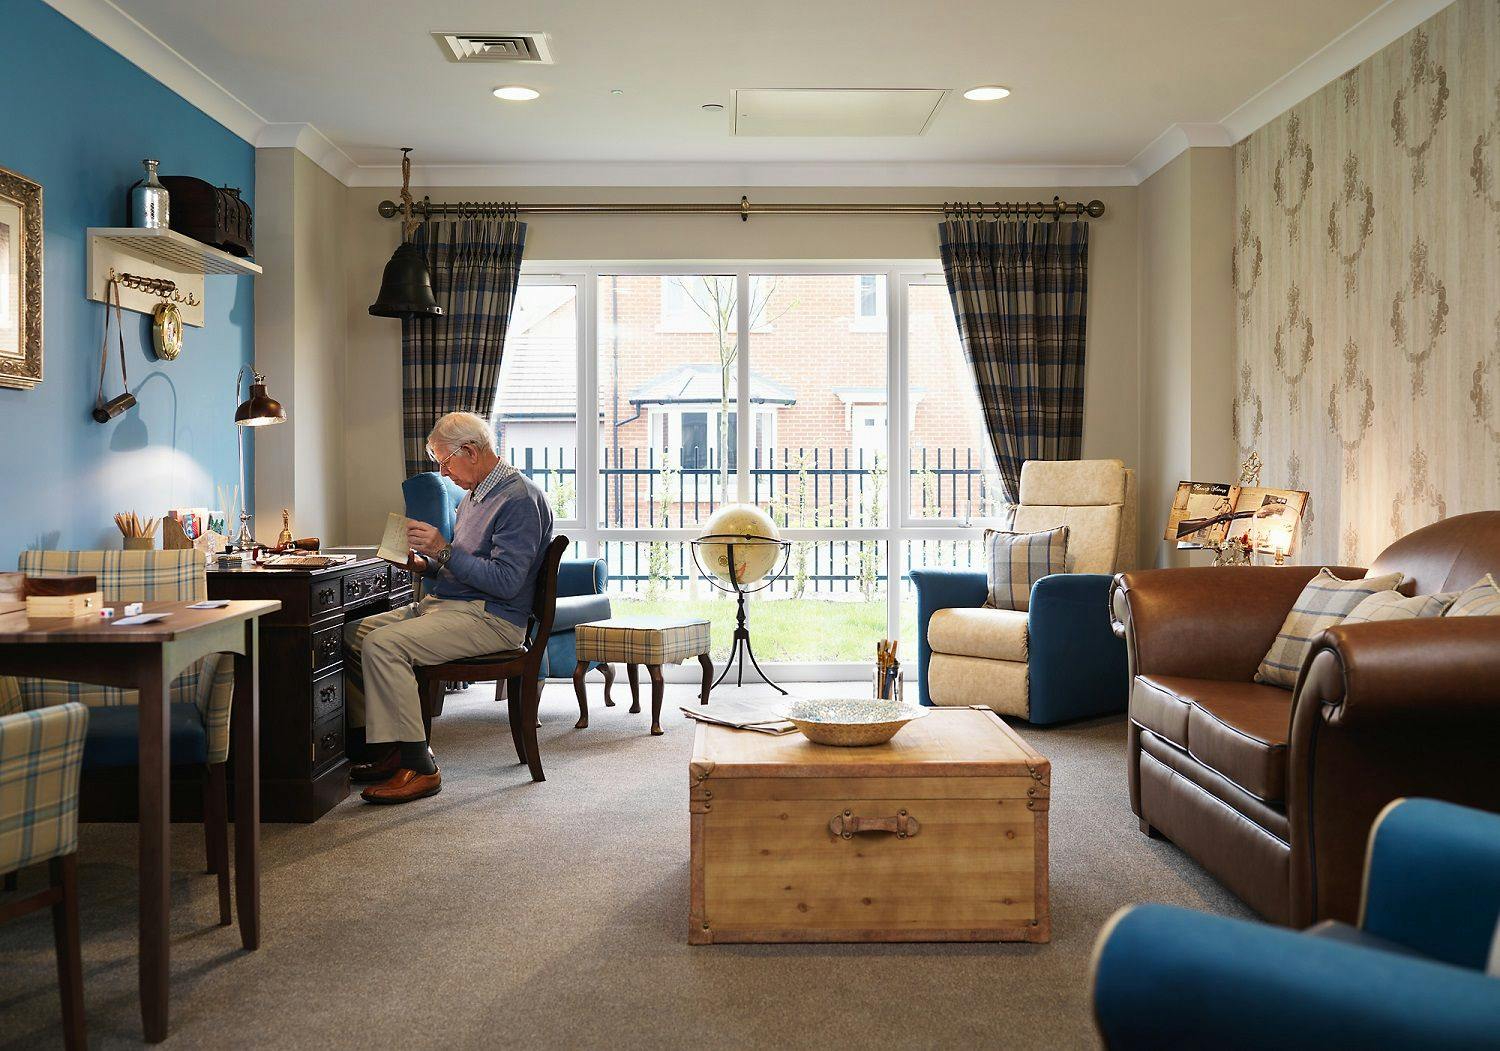 Bedroom at Hartford Court Care Home in Portsmouth, Hampshire